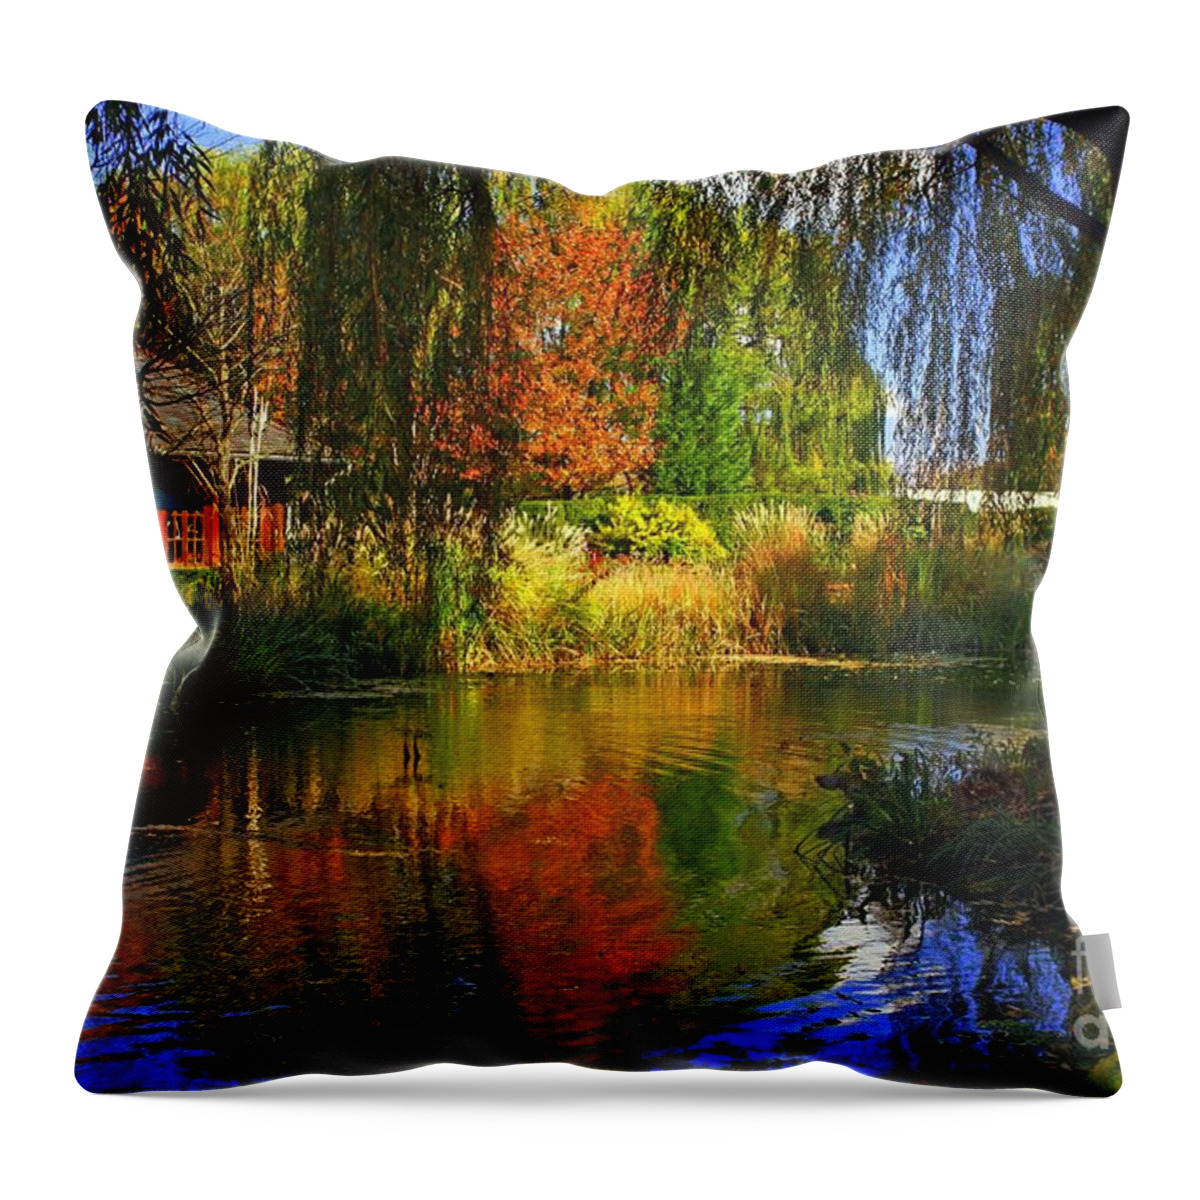 Marcia Lee Jones Throw Pillow featuring the photograph Land Of Enchantment by Marcia Lee Jones